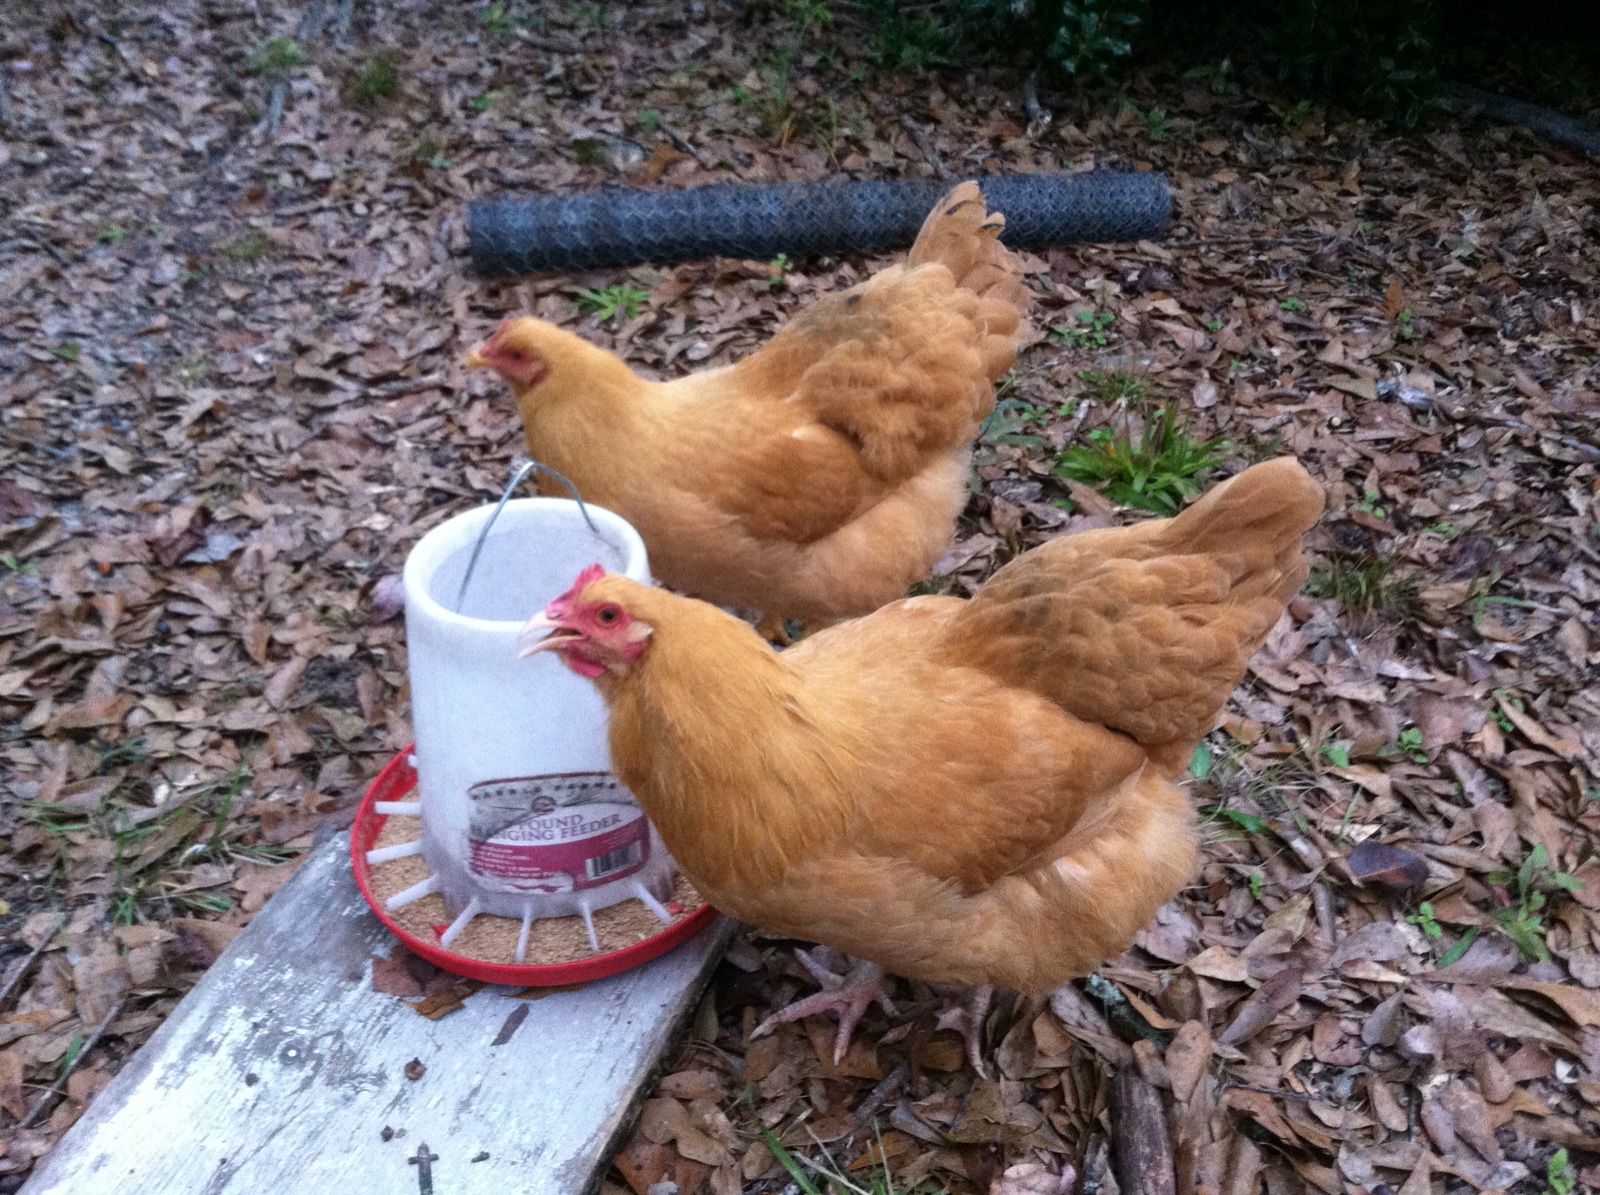 My big beautiful babies enjoying some crumble. Closest is Dorthy, she's slightly bigger, darker in color and has white legs. Rose is behind her, the boss of the two, with yellow legs and smaller comb.